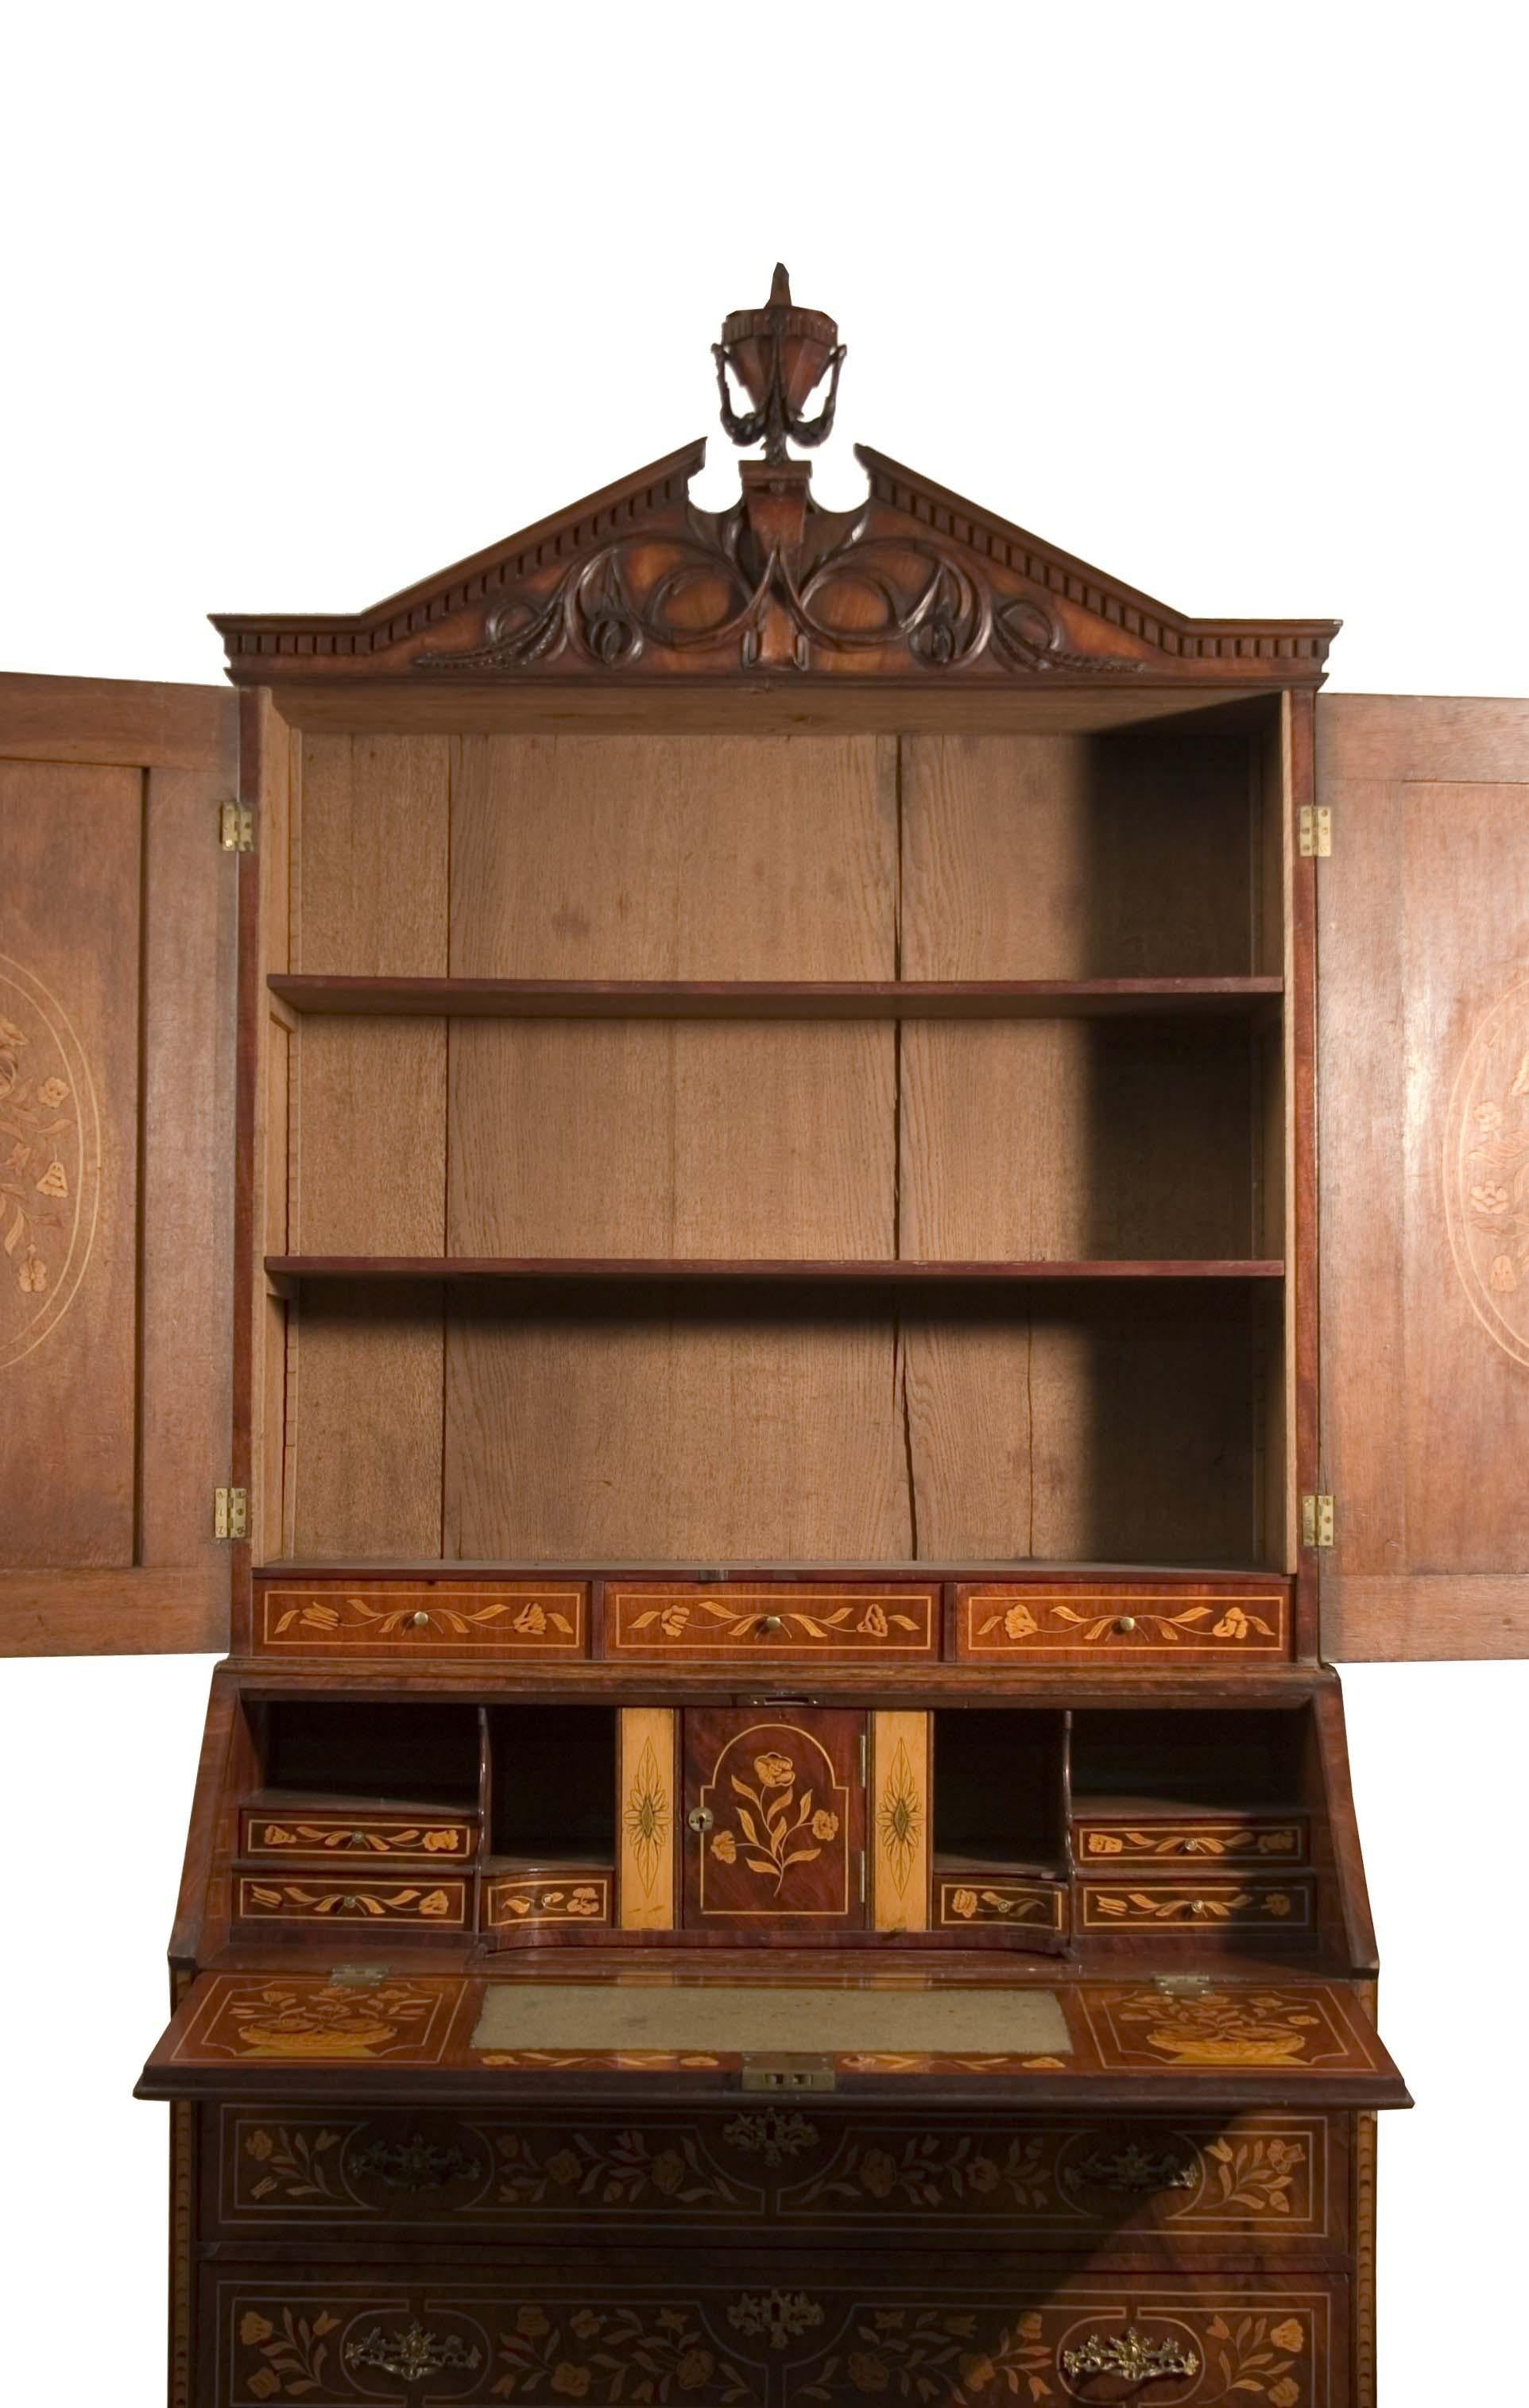 Exquisite mahogany feathered trumeau, richly adorned with polychrome floral inlays typical of Dutch craftsmanship. The lower part is divided into three large drawers and two small drawers that support the drop-front, decorated with inlays depicting